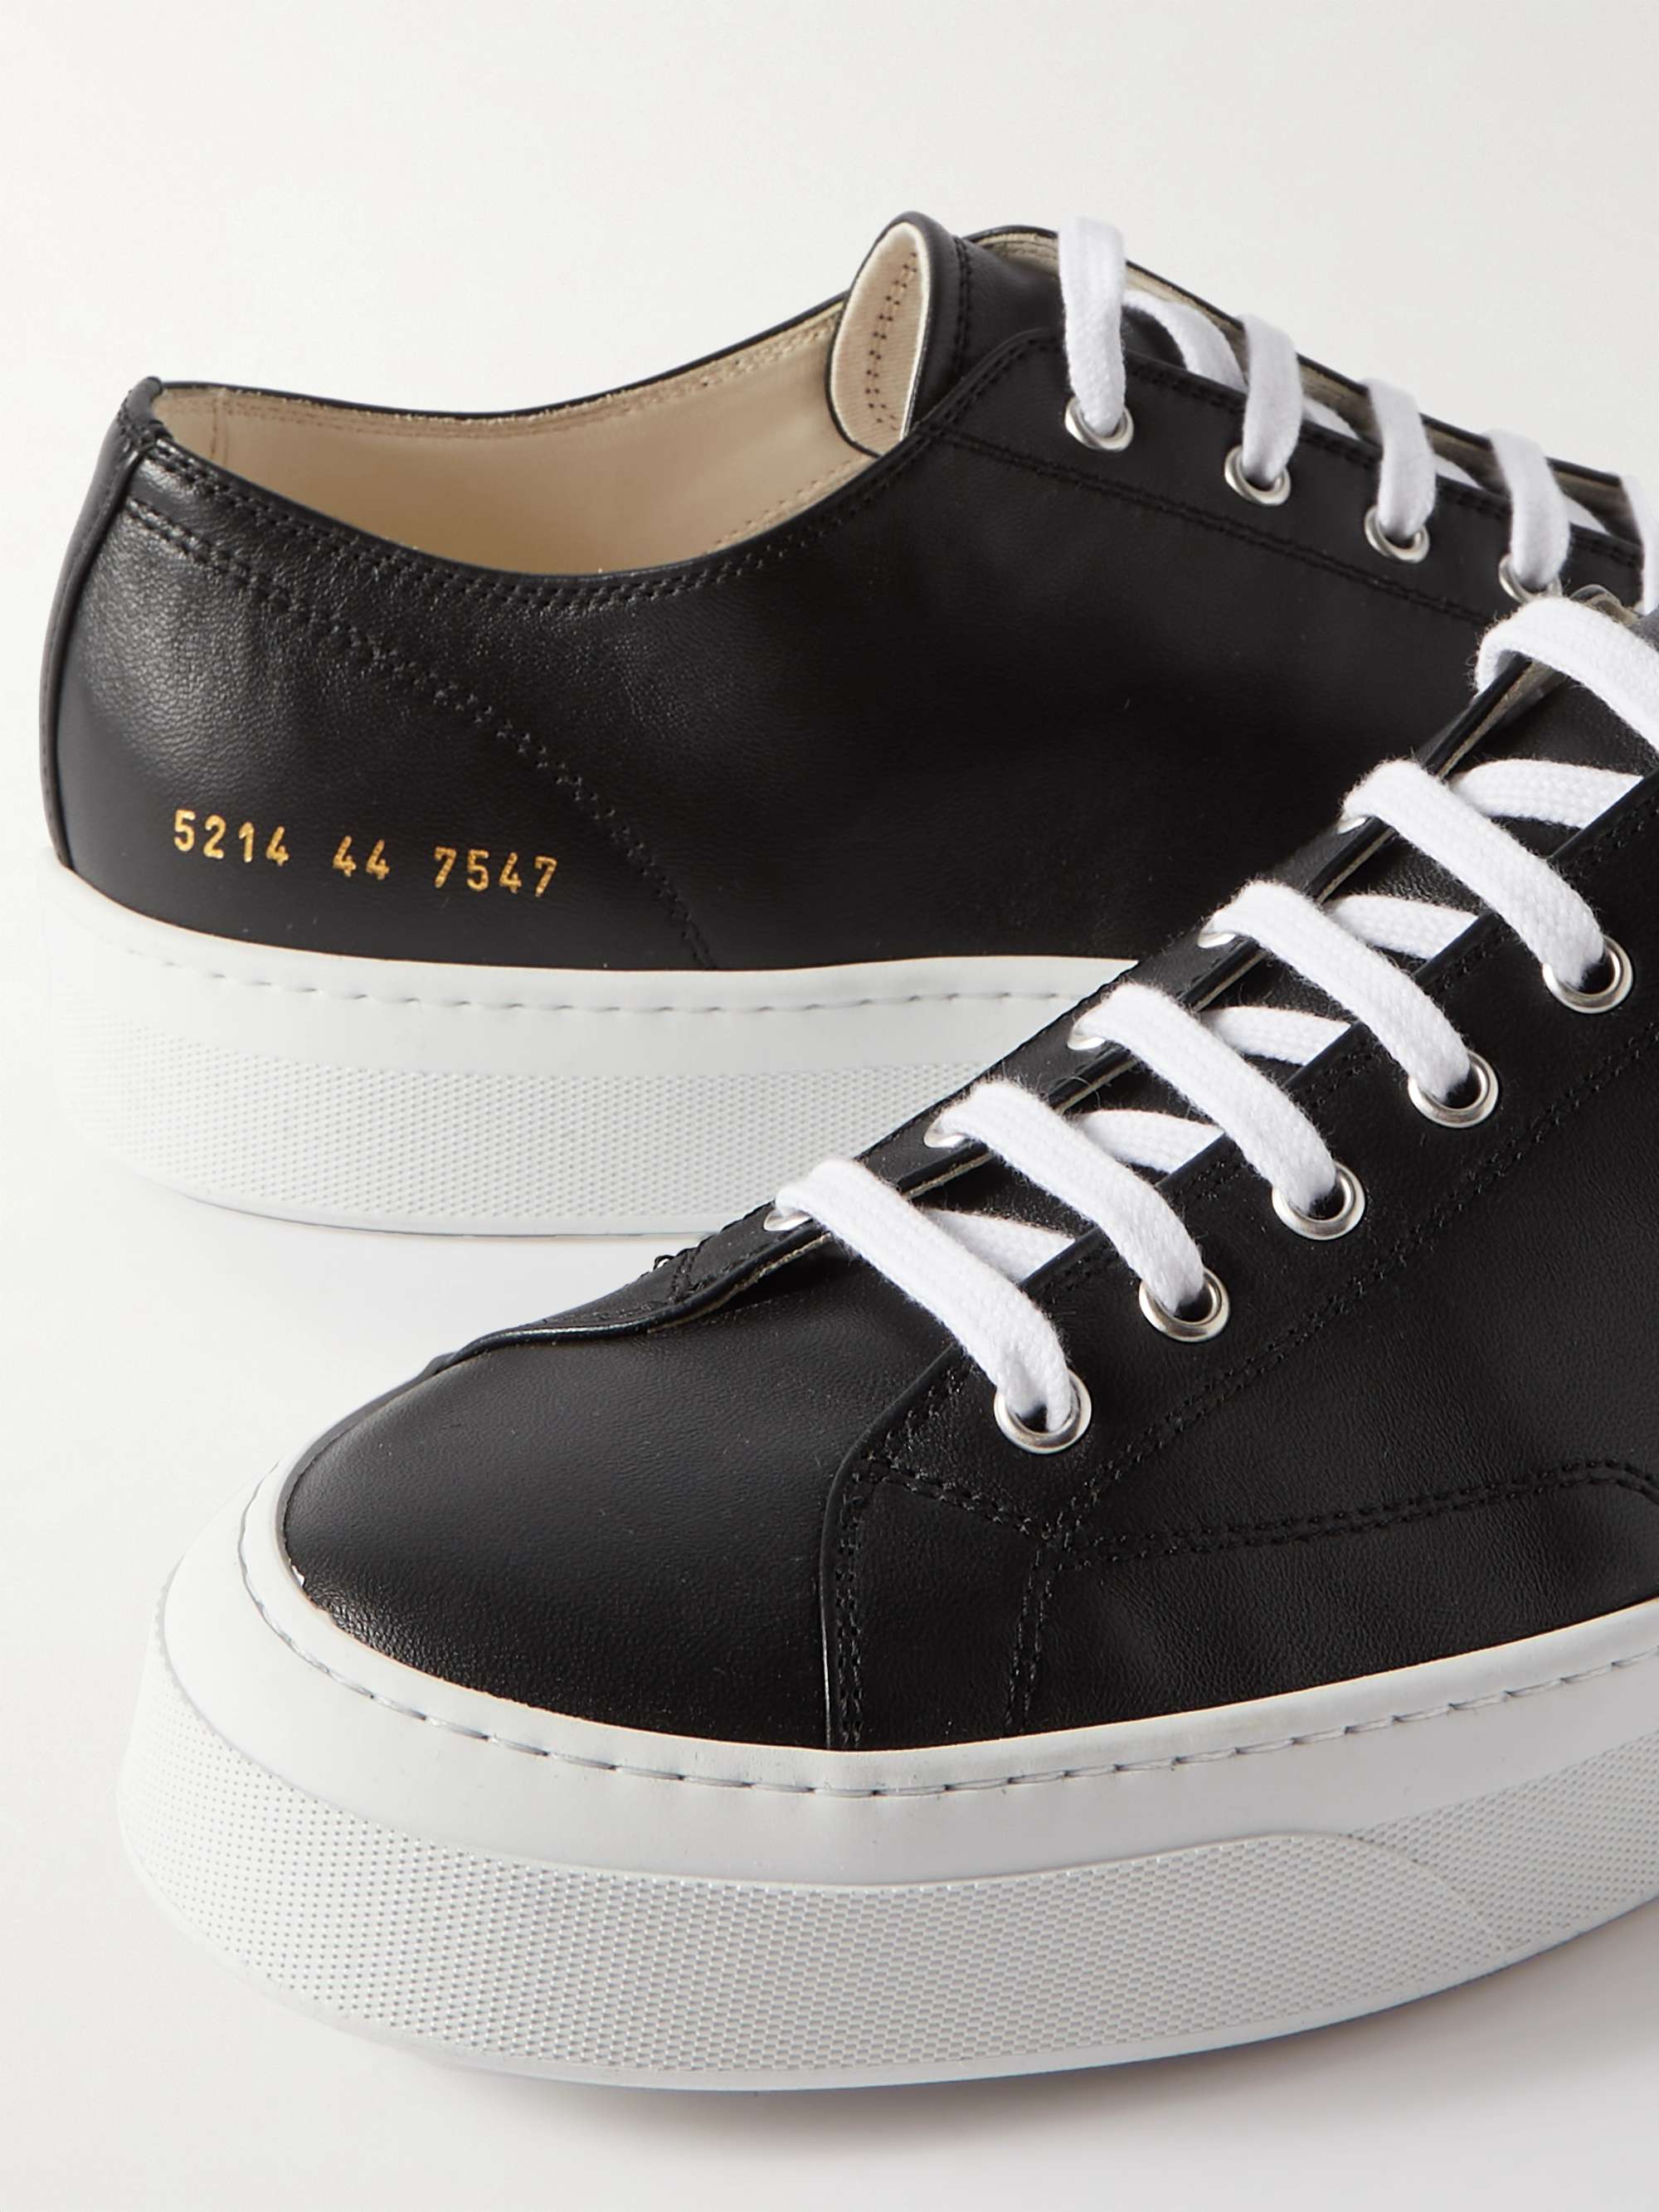 COMMON PROJECTS Tournament Leather Sneakers